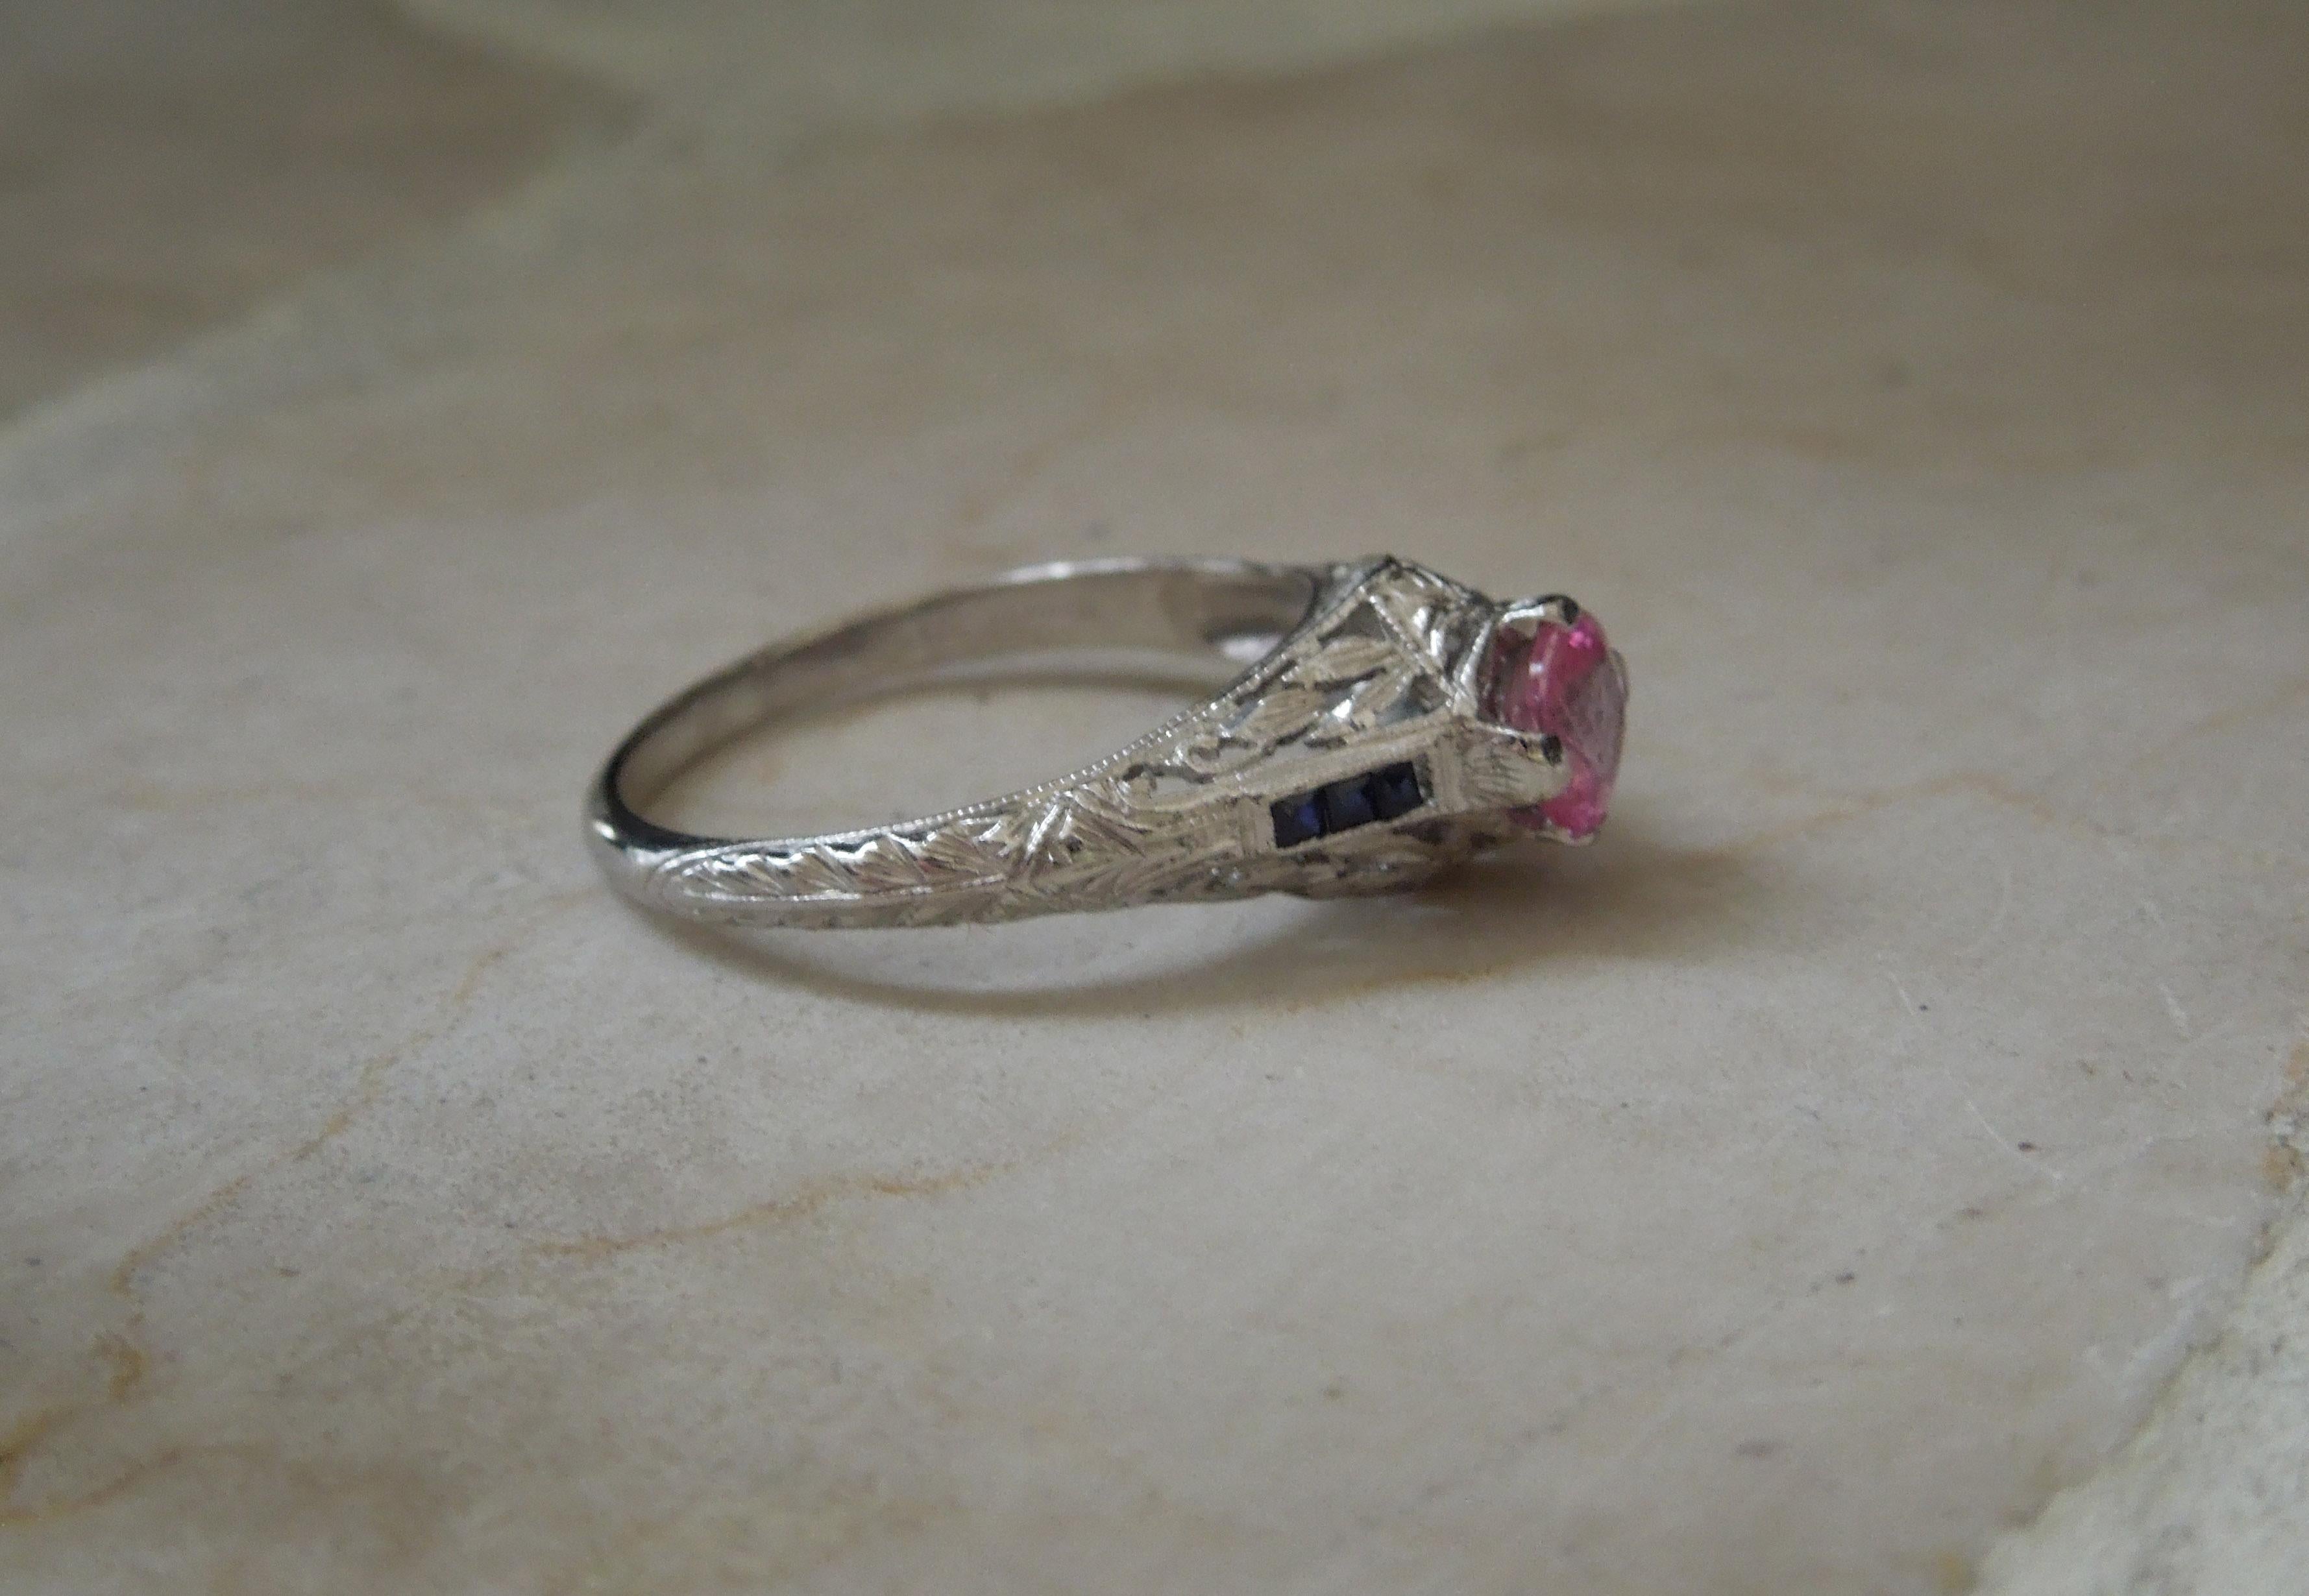 From a local New Orleans estate, this Edwardian Pink & Blue Sapphire Ring features a central 0.54 carat Natural Intense Vivid Pink Sapphire at 4.8mm in diameter. Among the rarest colors of Sapphires in today's market, as well as Sapphire being the